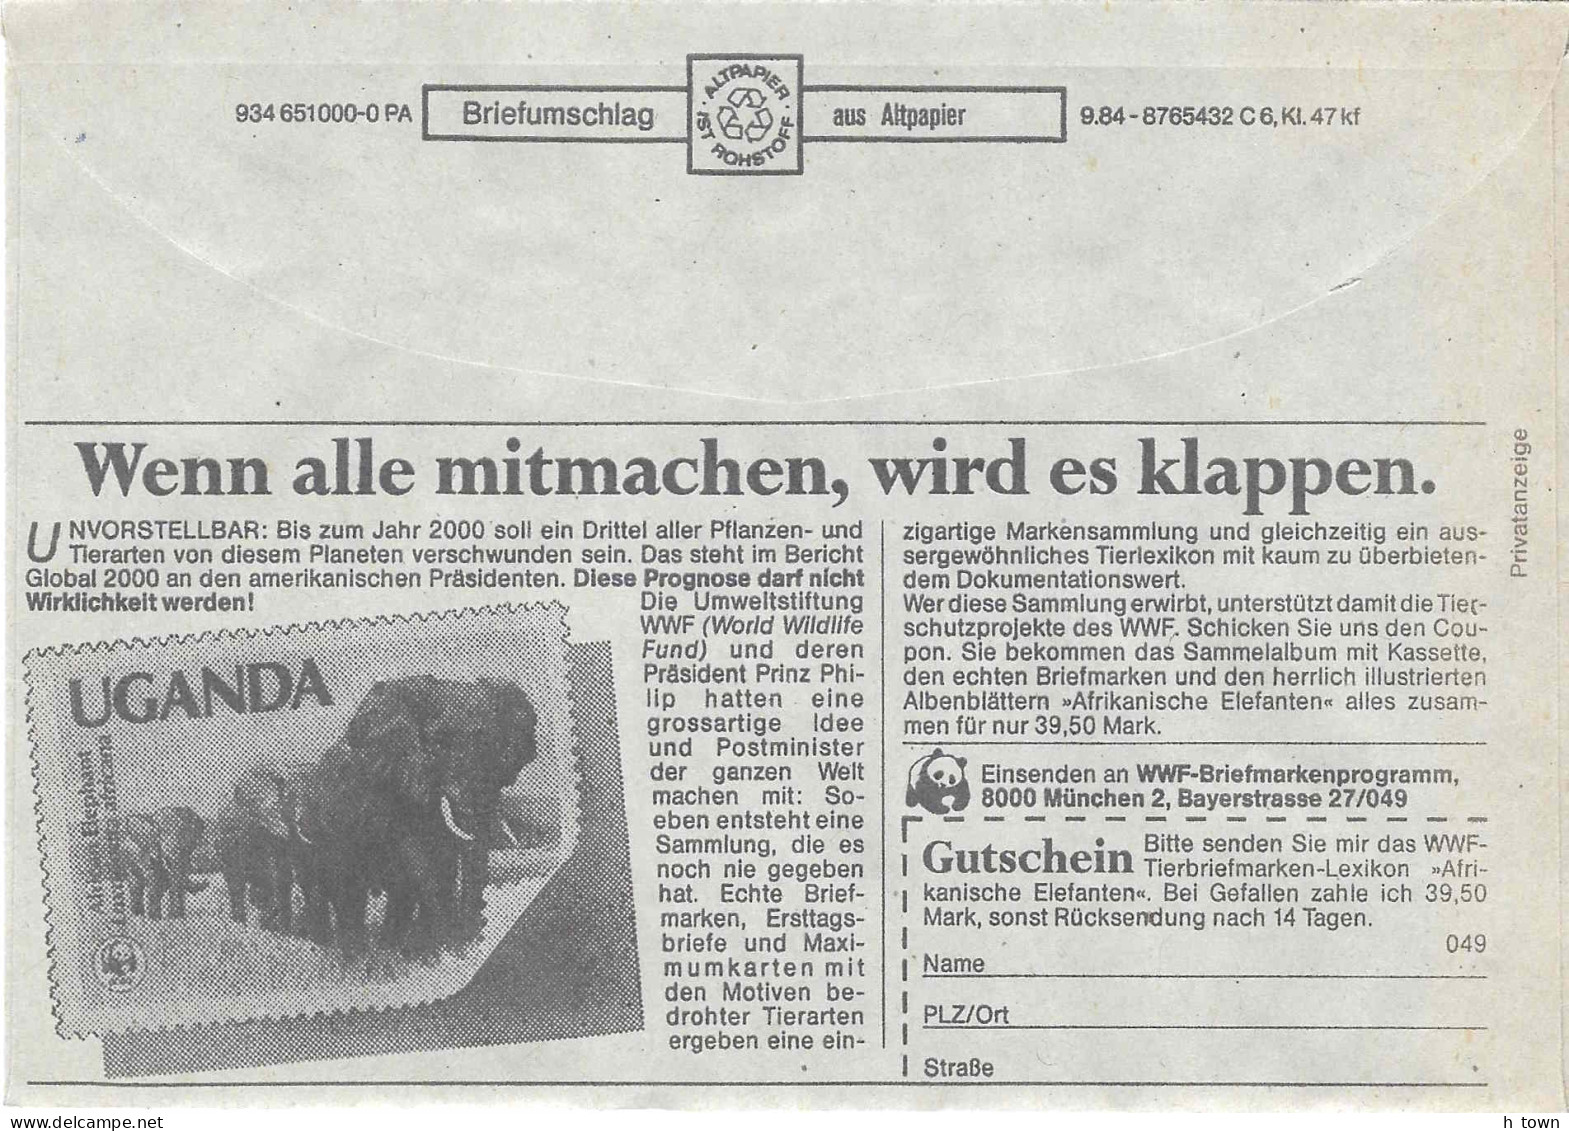 324  Elephant, Timbre, WWF: Env. Port Payée D'Allemagne - Stamp, WWF-Advertising On PP Cover From Germany  - Eléphants